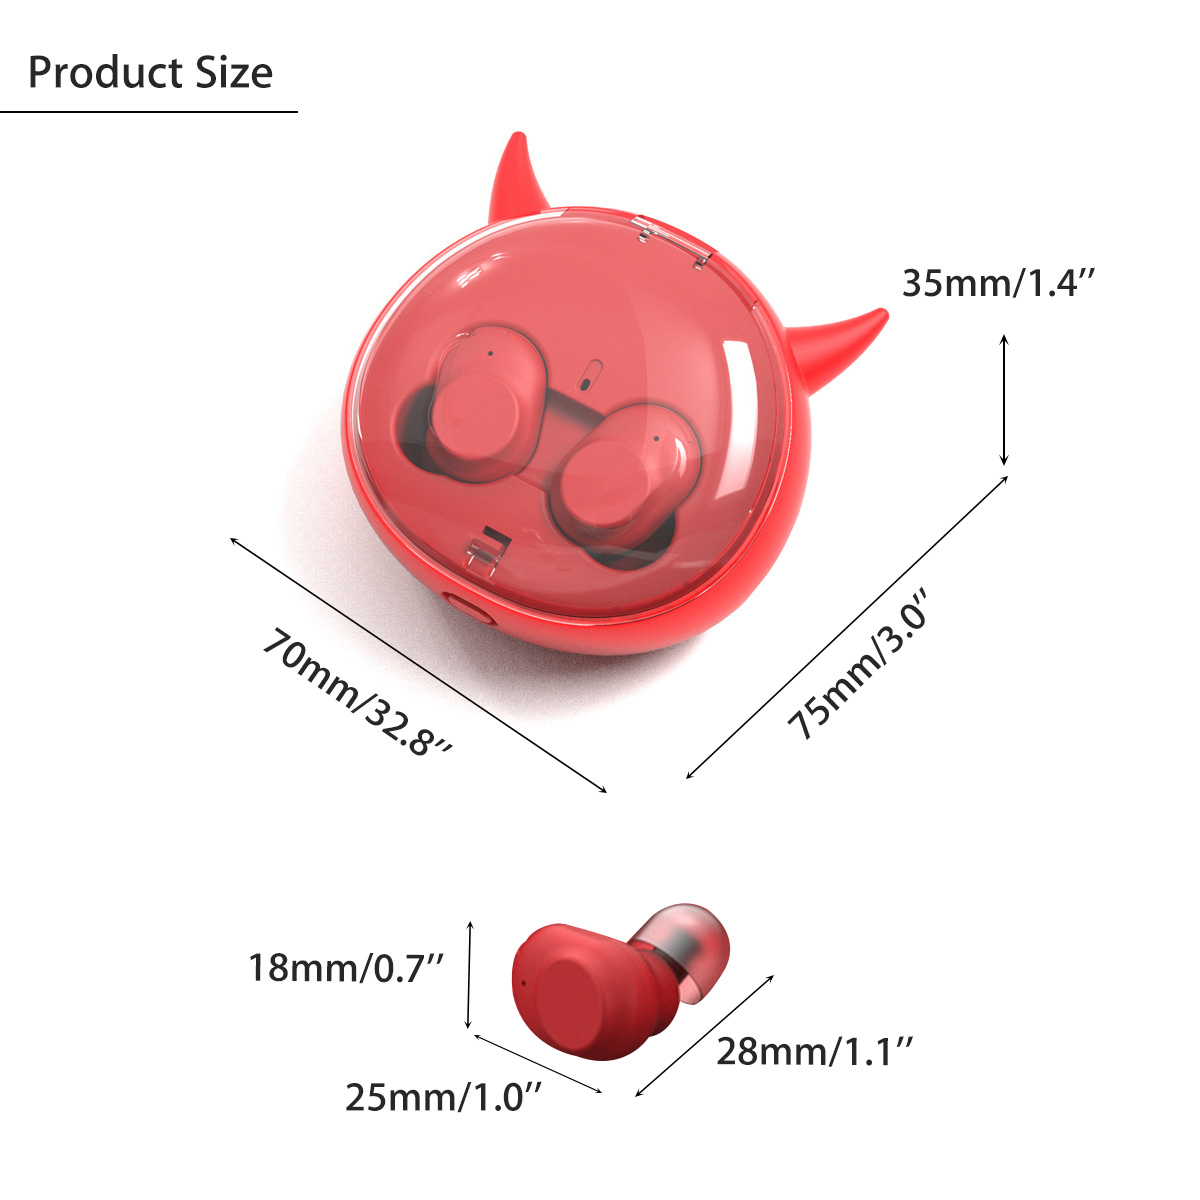 V18-Mini-Cartoon-bluetooth-50-Earphone-Wireless-Stereo-Headset-With-TWS-Charging-Case-for-IOS-Androi-1559928-9